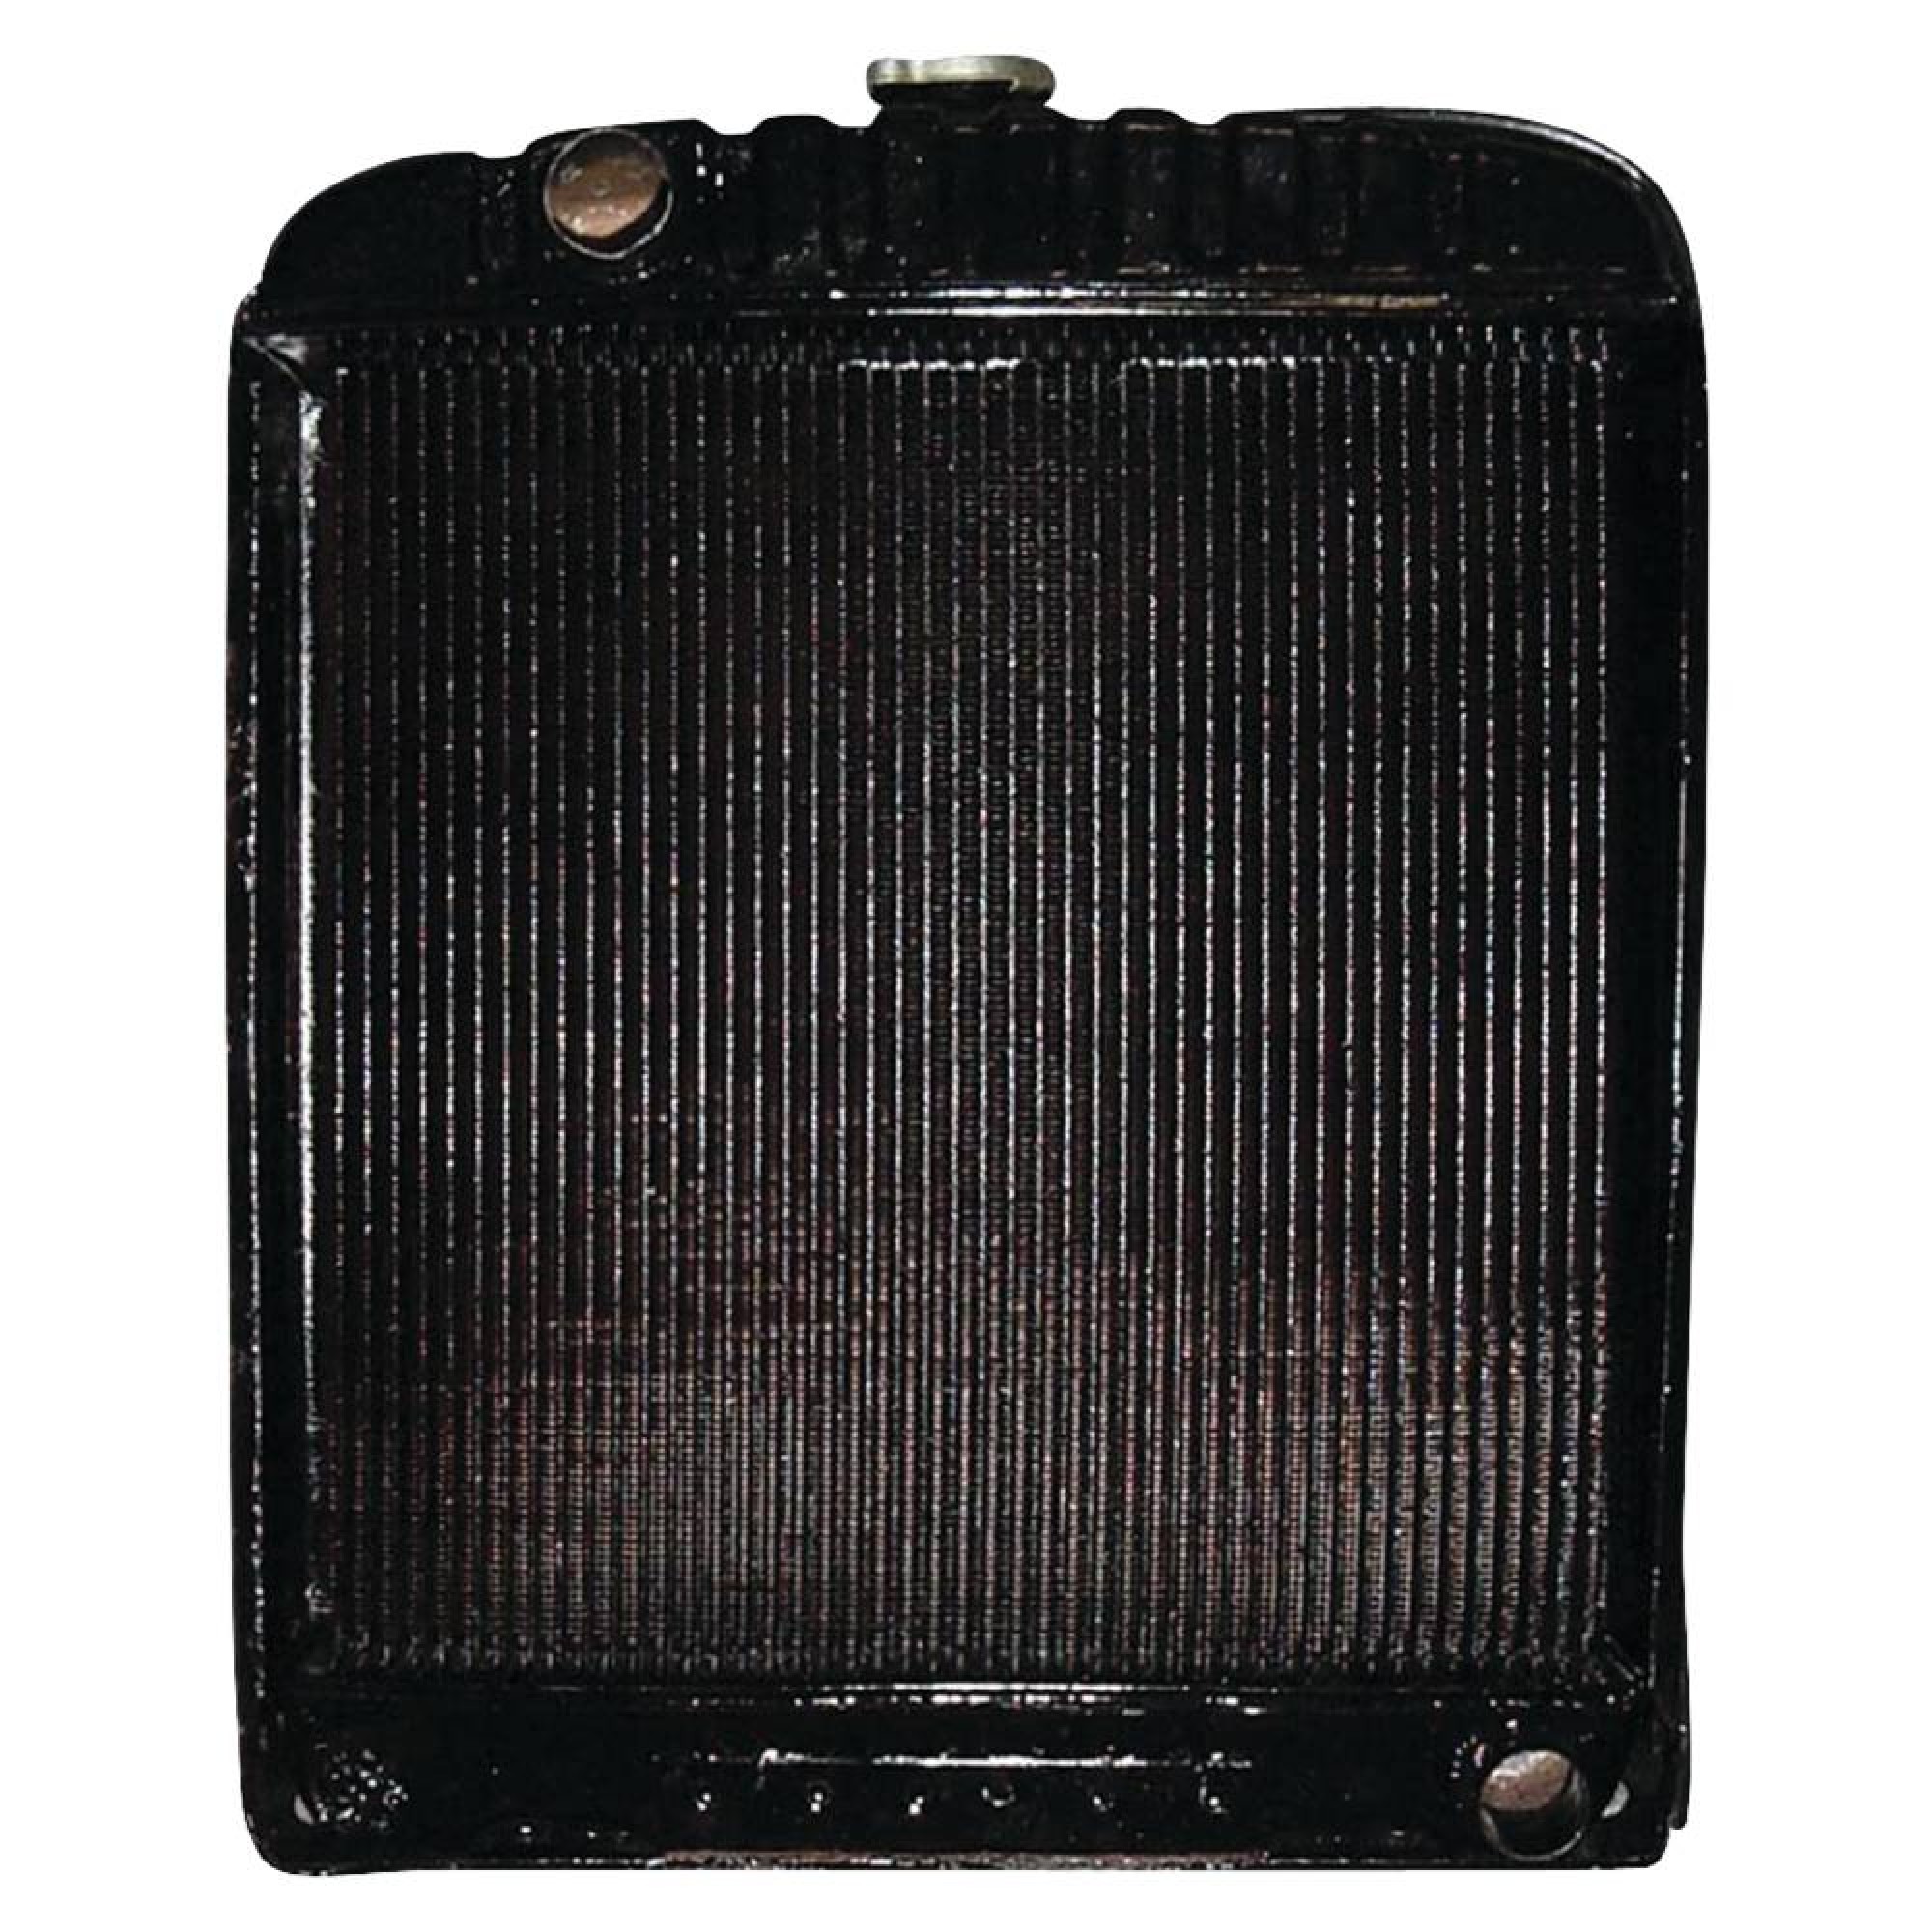 Complete Tractor Radiator for Case/International Tractor B275 B414 276 434